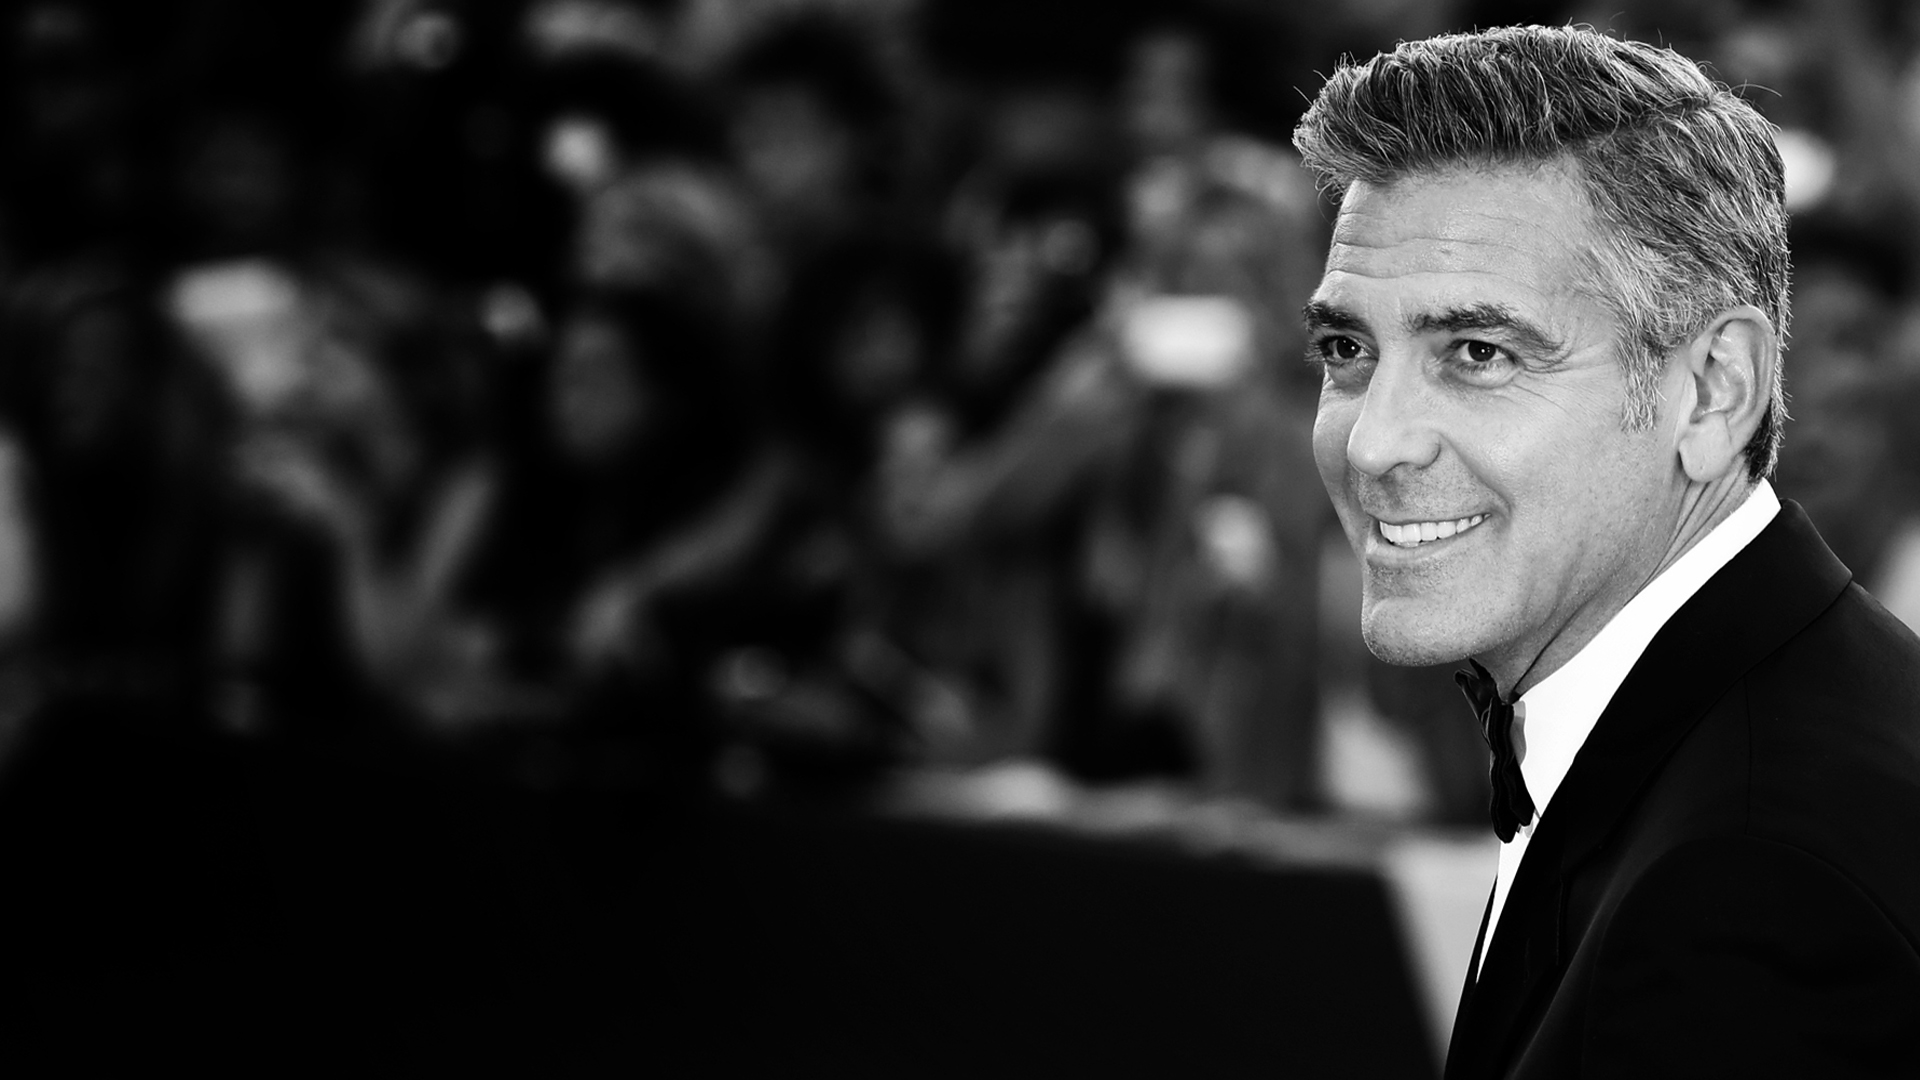 Monochrome George Clooney Smile HD Wallpaper Px